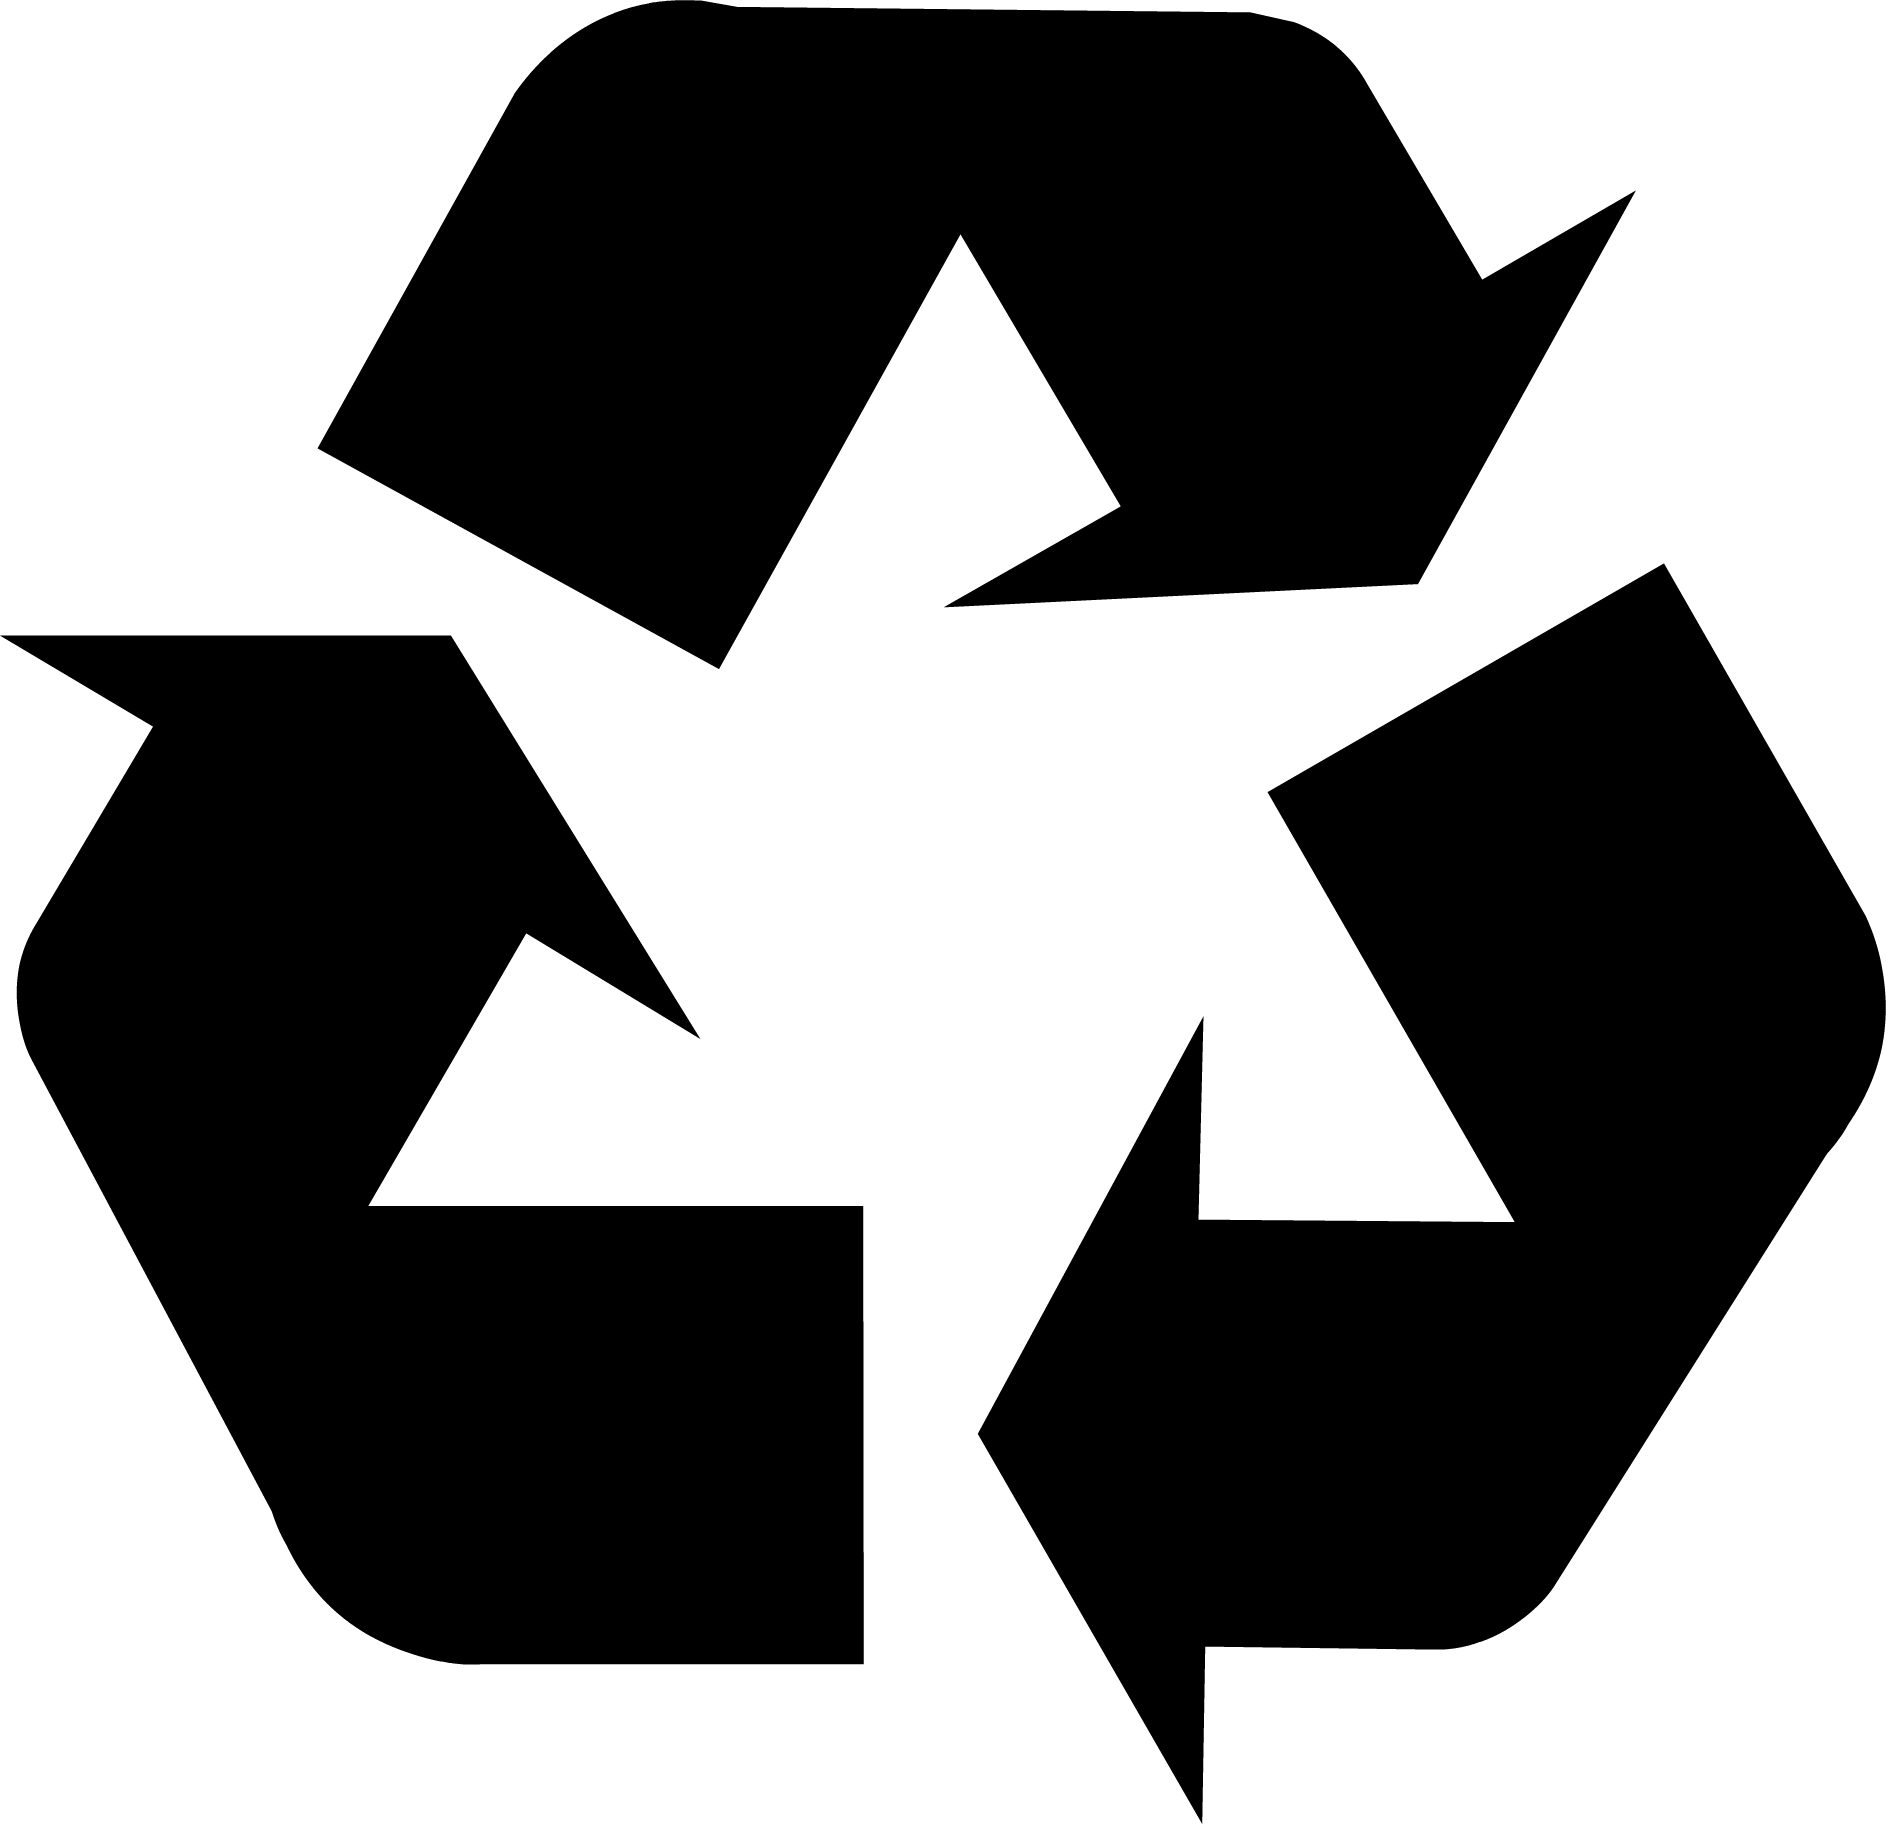 We Recycle Logo - Recycling Symbol - Download the Original Recycle Logo